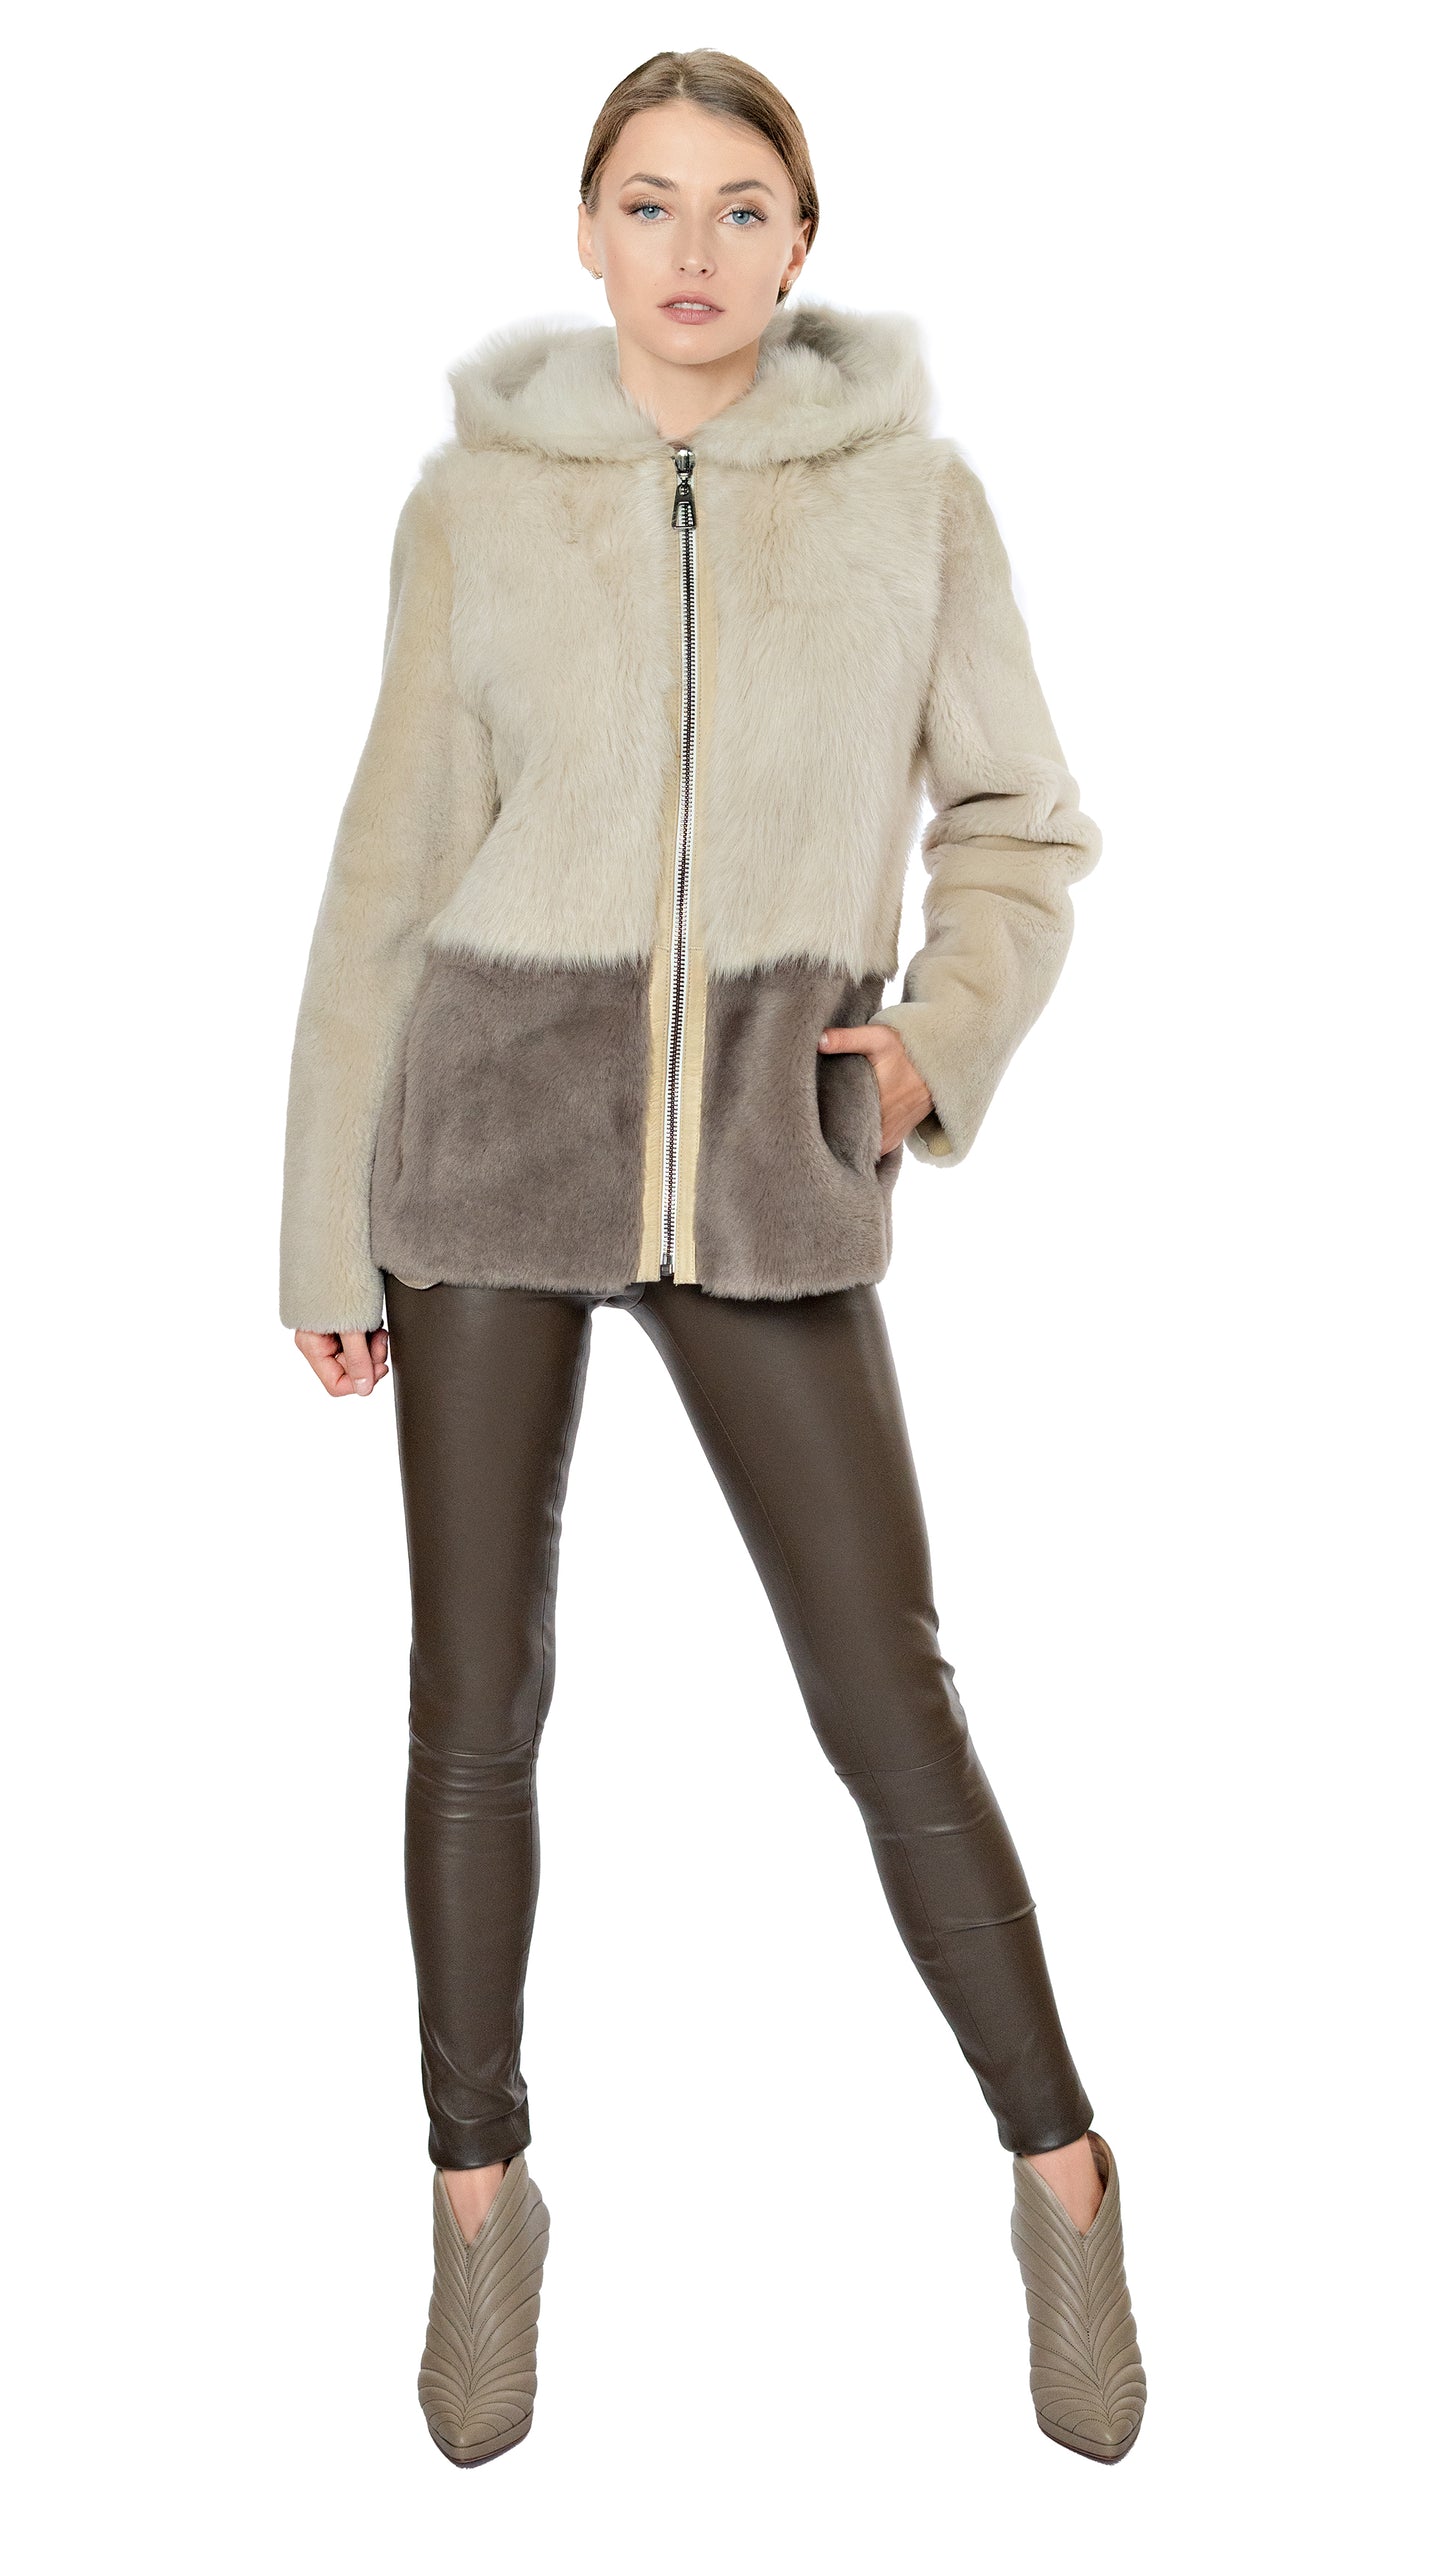 Rizal shearling coat with hood in ivory and grey